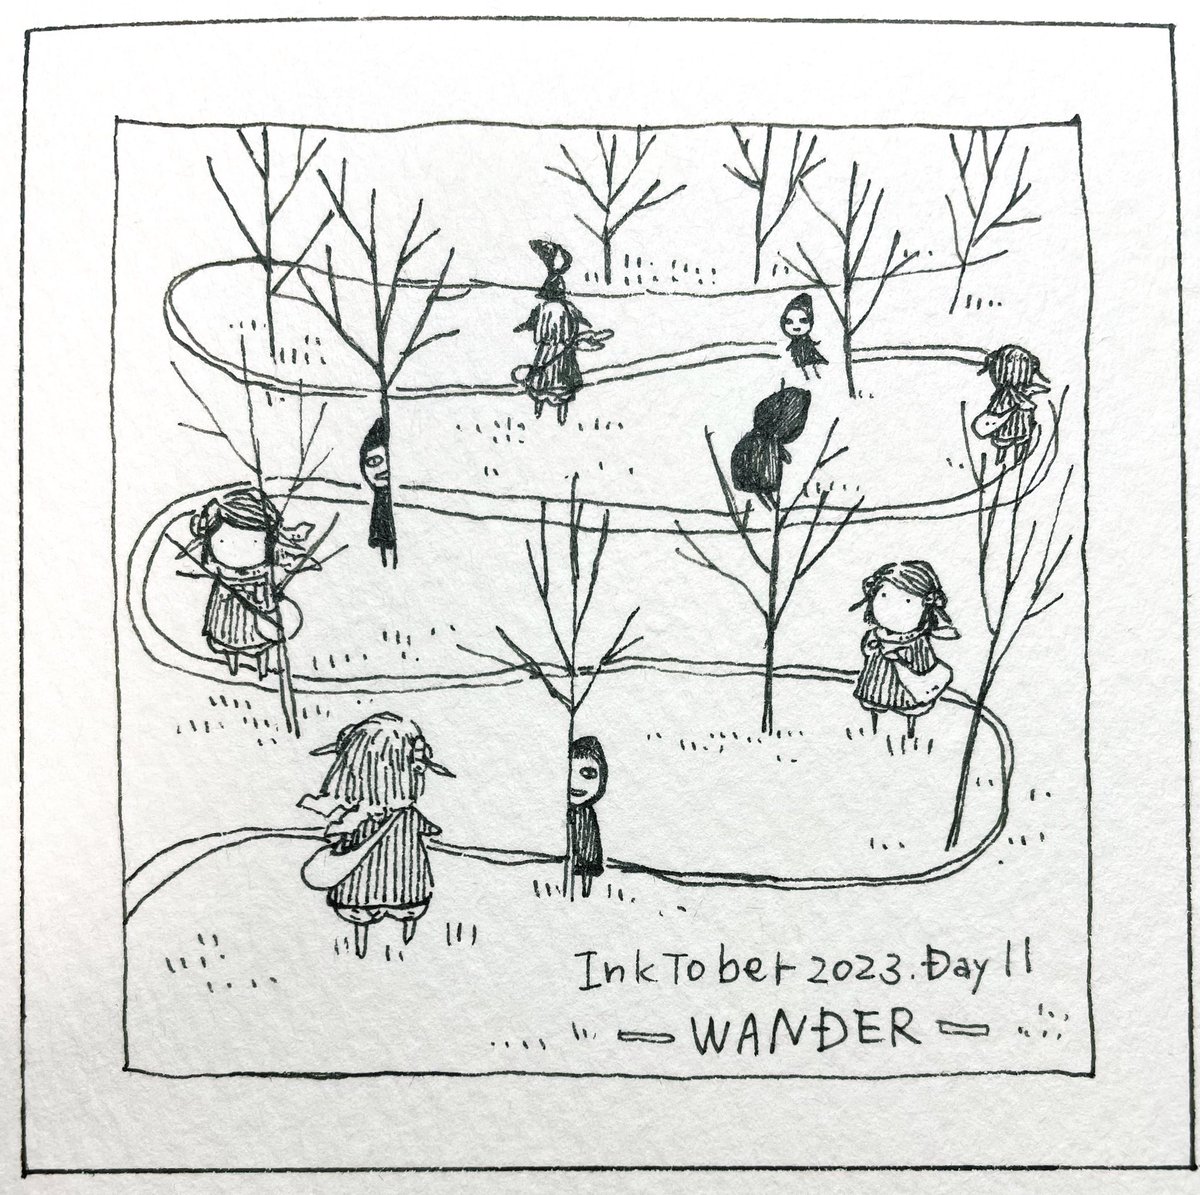 10/11: WANDER
森の中の曲がりくねった道で迷子に出会った。
I met the child wandered off in the road who wanders through the woods went went wandered around.

 #inktober2023  #inktober2023day11  #Pavot  #ペン画 